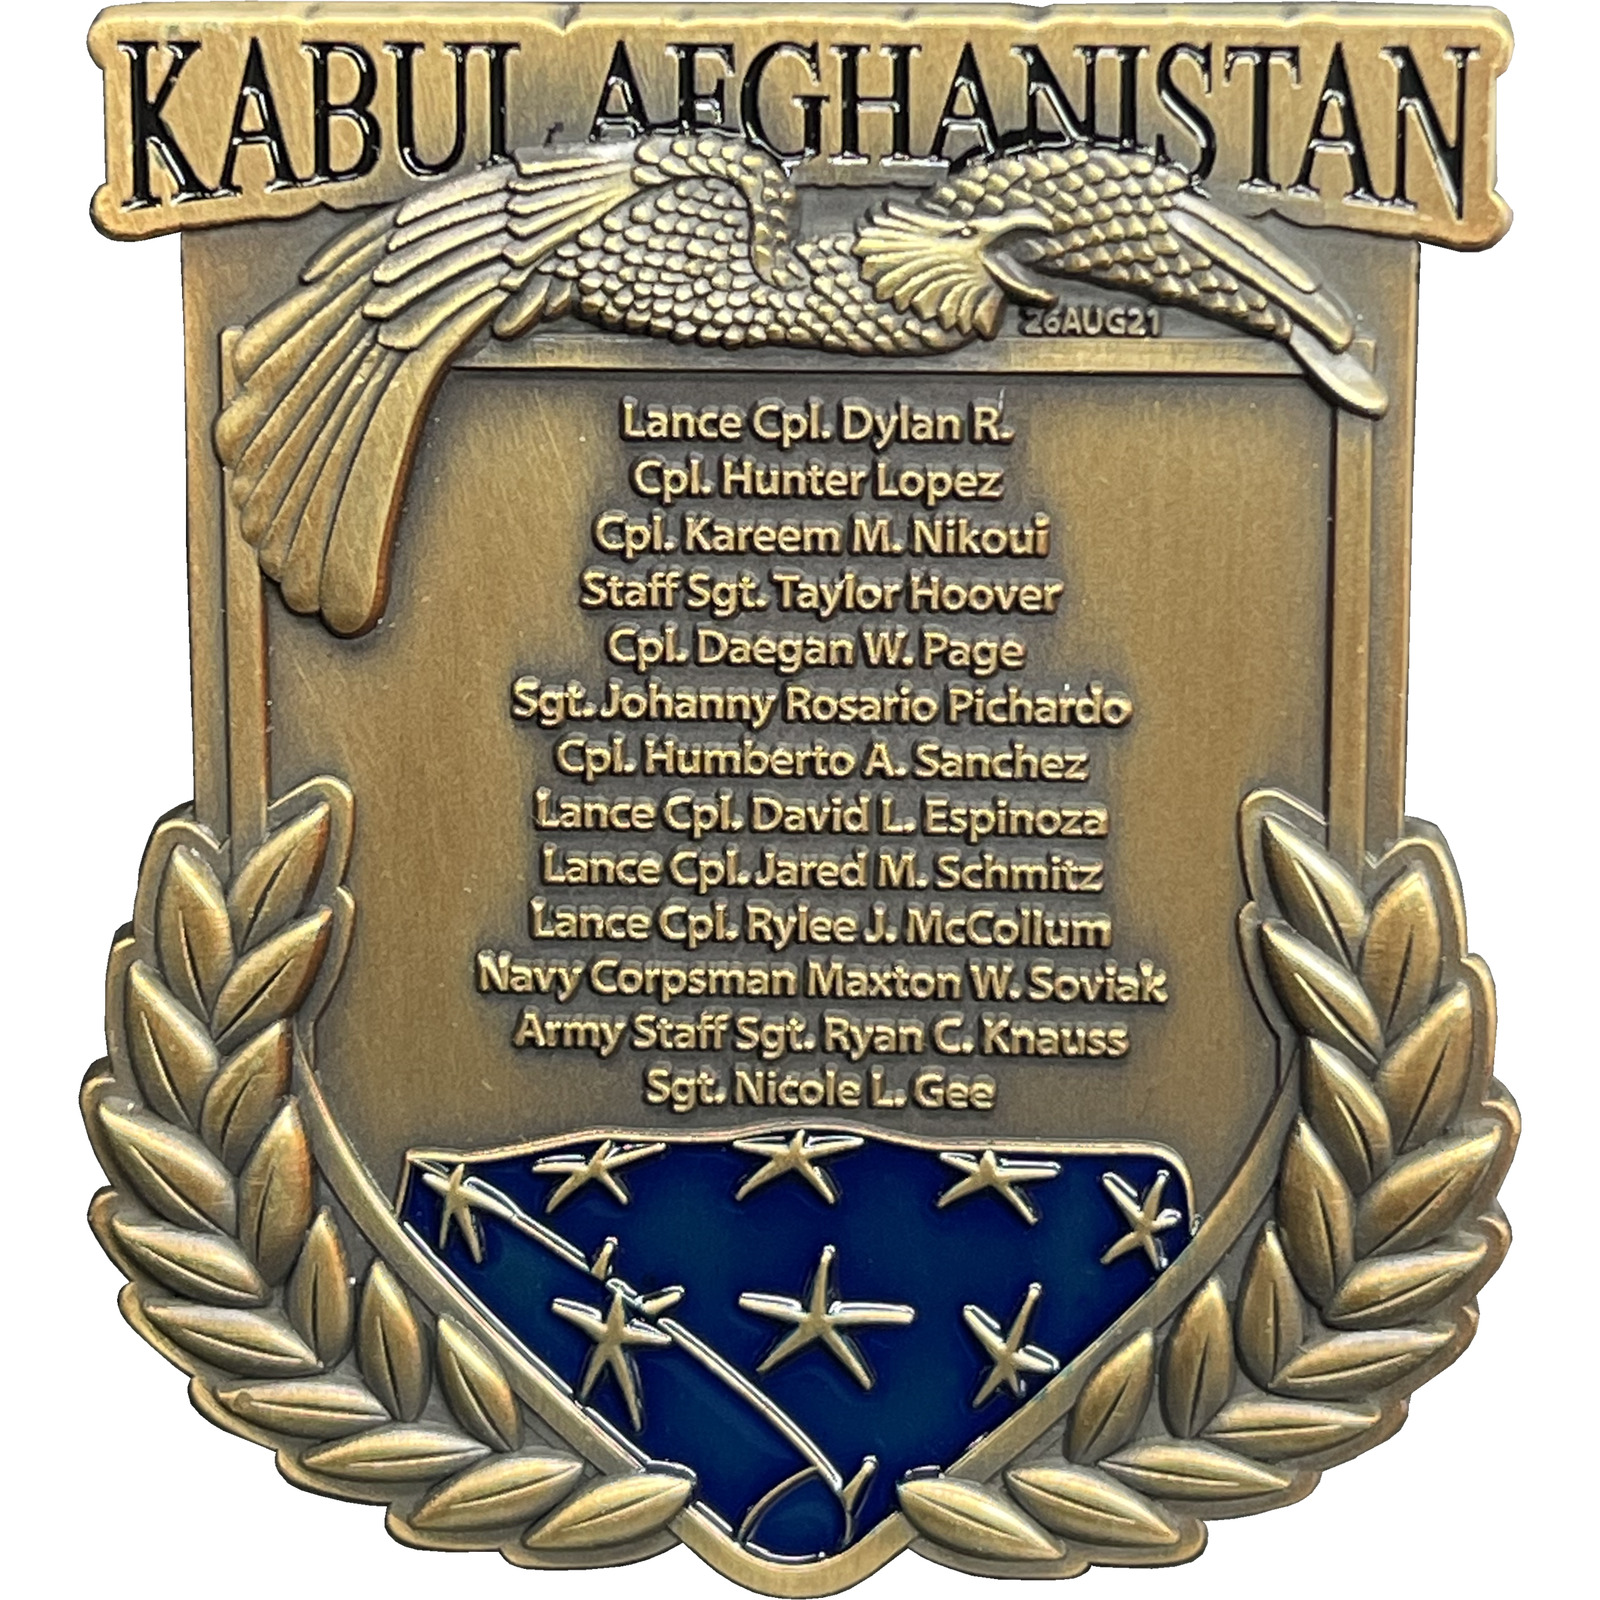 BL17-012 Kabul Afghanistan Final Inspection Memorial Challenge Coin Marines Navy